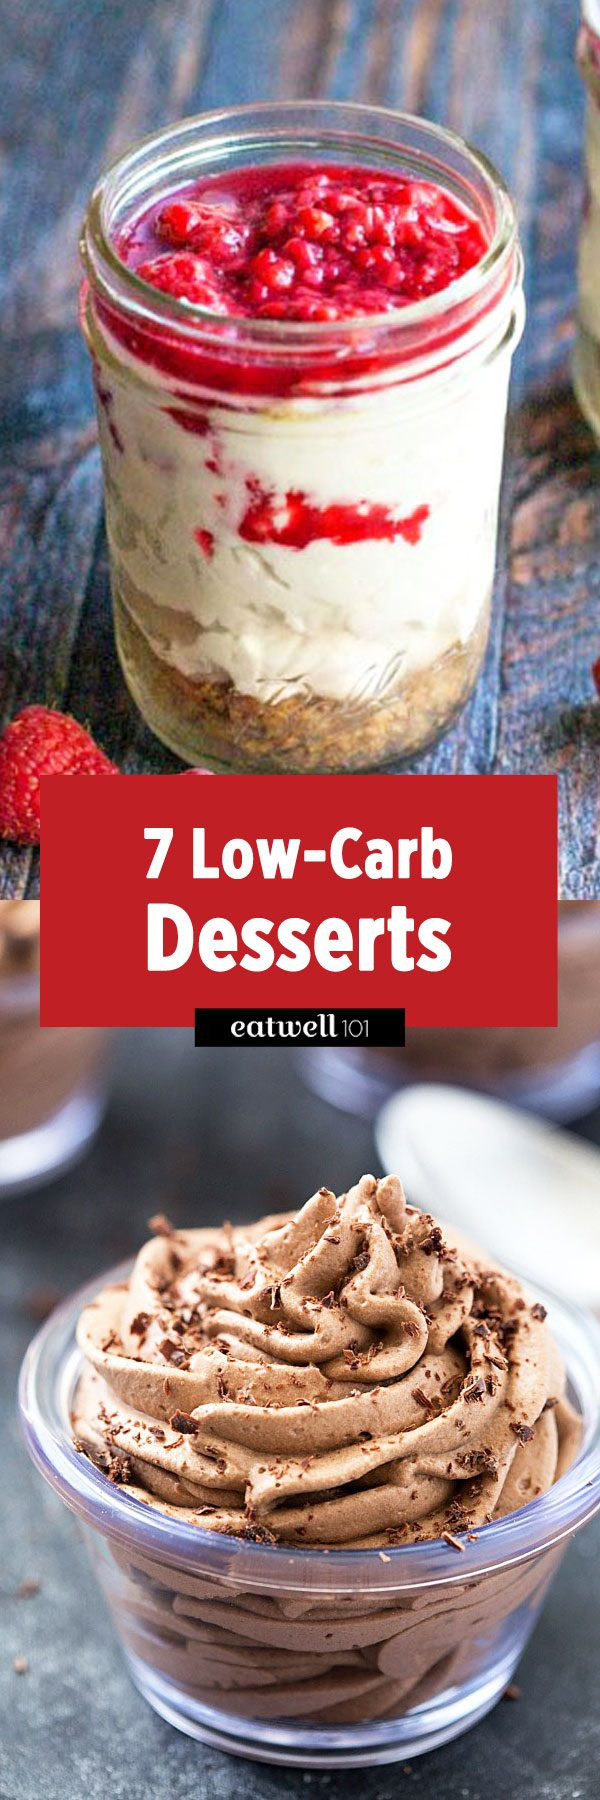 Low Carb Christmas Desserts
 Your Christmas Dessert Needs These Low Carb Treats